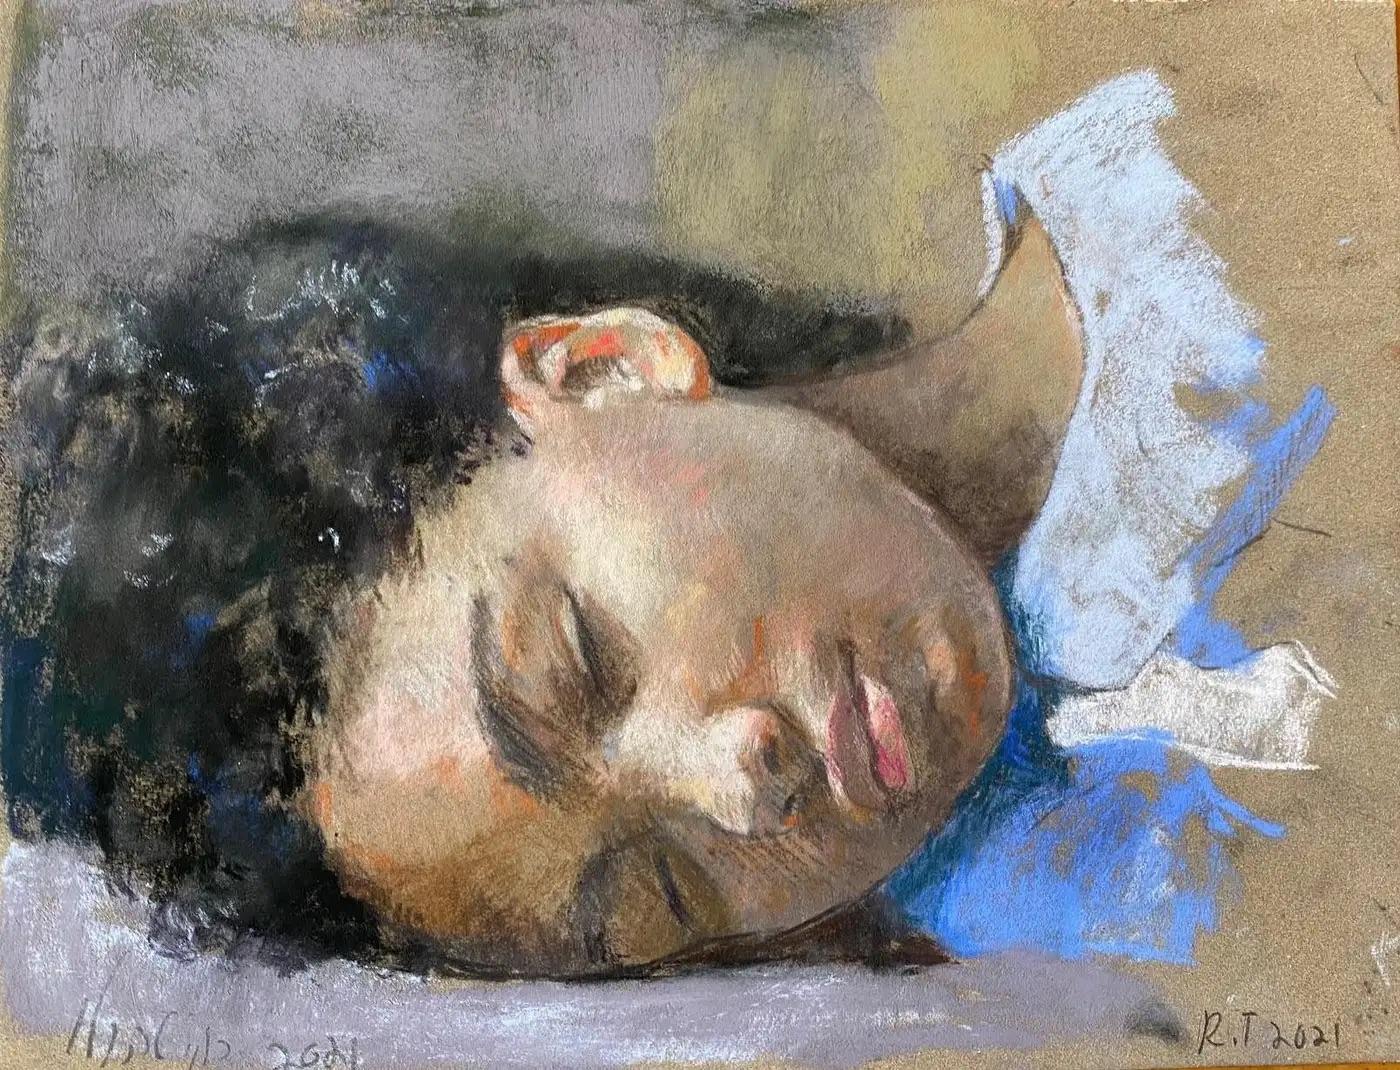 "Lovina Sleeping" by Roni Taharlev is an intimate and tender portrayal that encapsulates the quietude of its subject. This 15.5" x 18" oil pastel on paper piece is crafted with soft, harmonious strokes, highlighting the peaceful repose of Lavina.